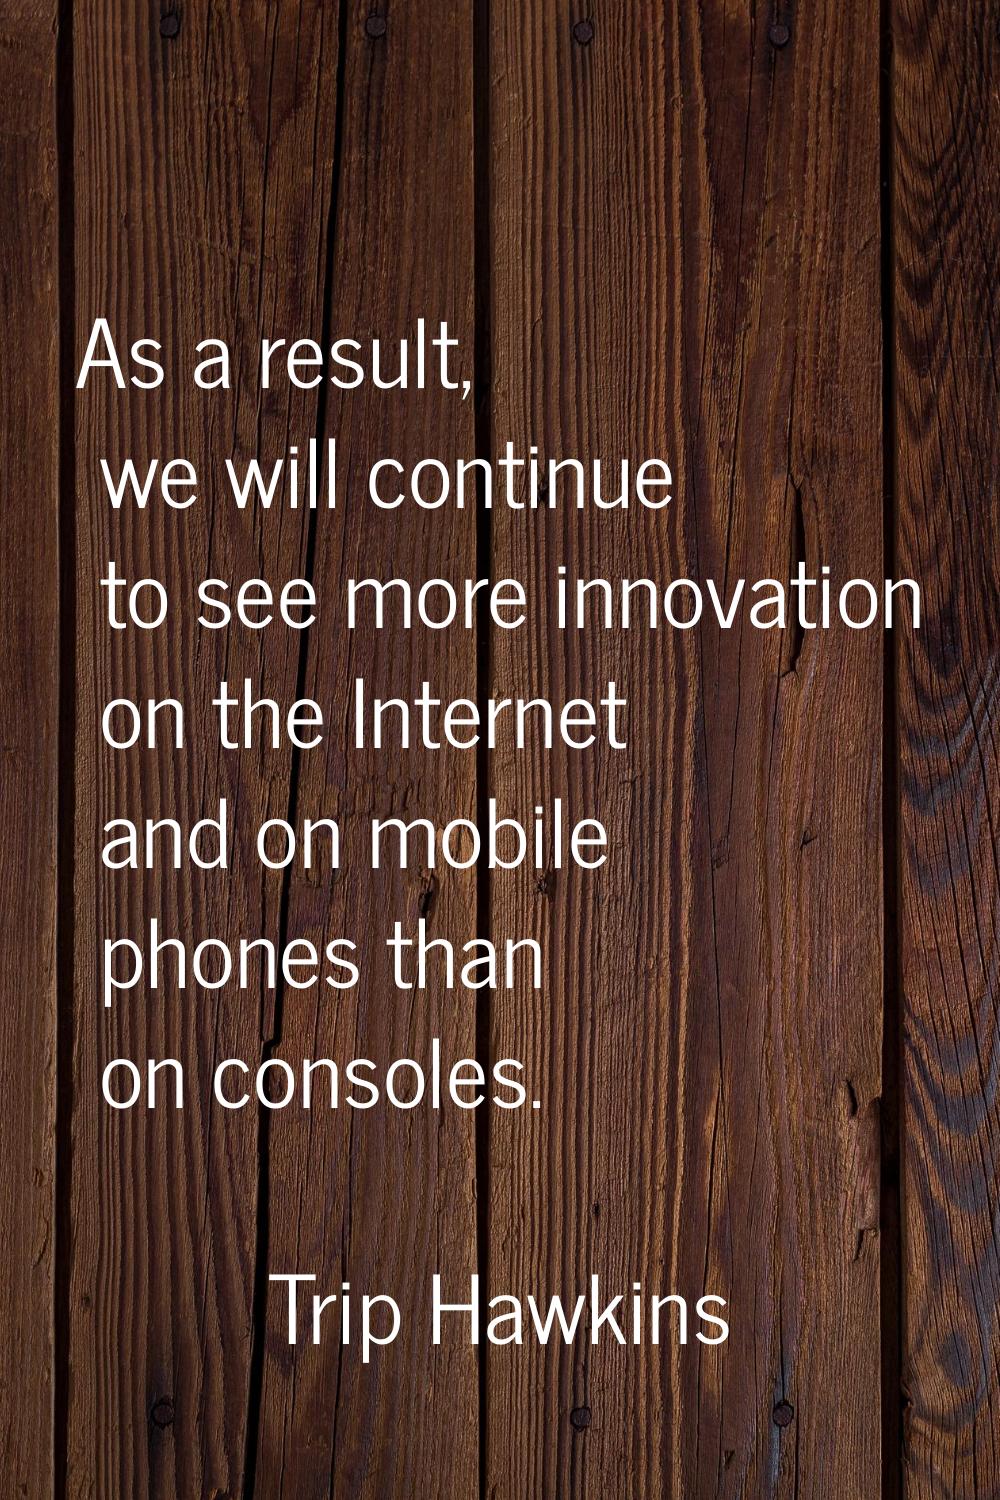 As a result, we will continue to see more innovation on the Internet and on mobile phones than on c